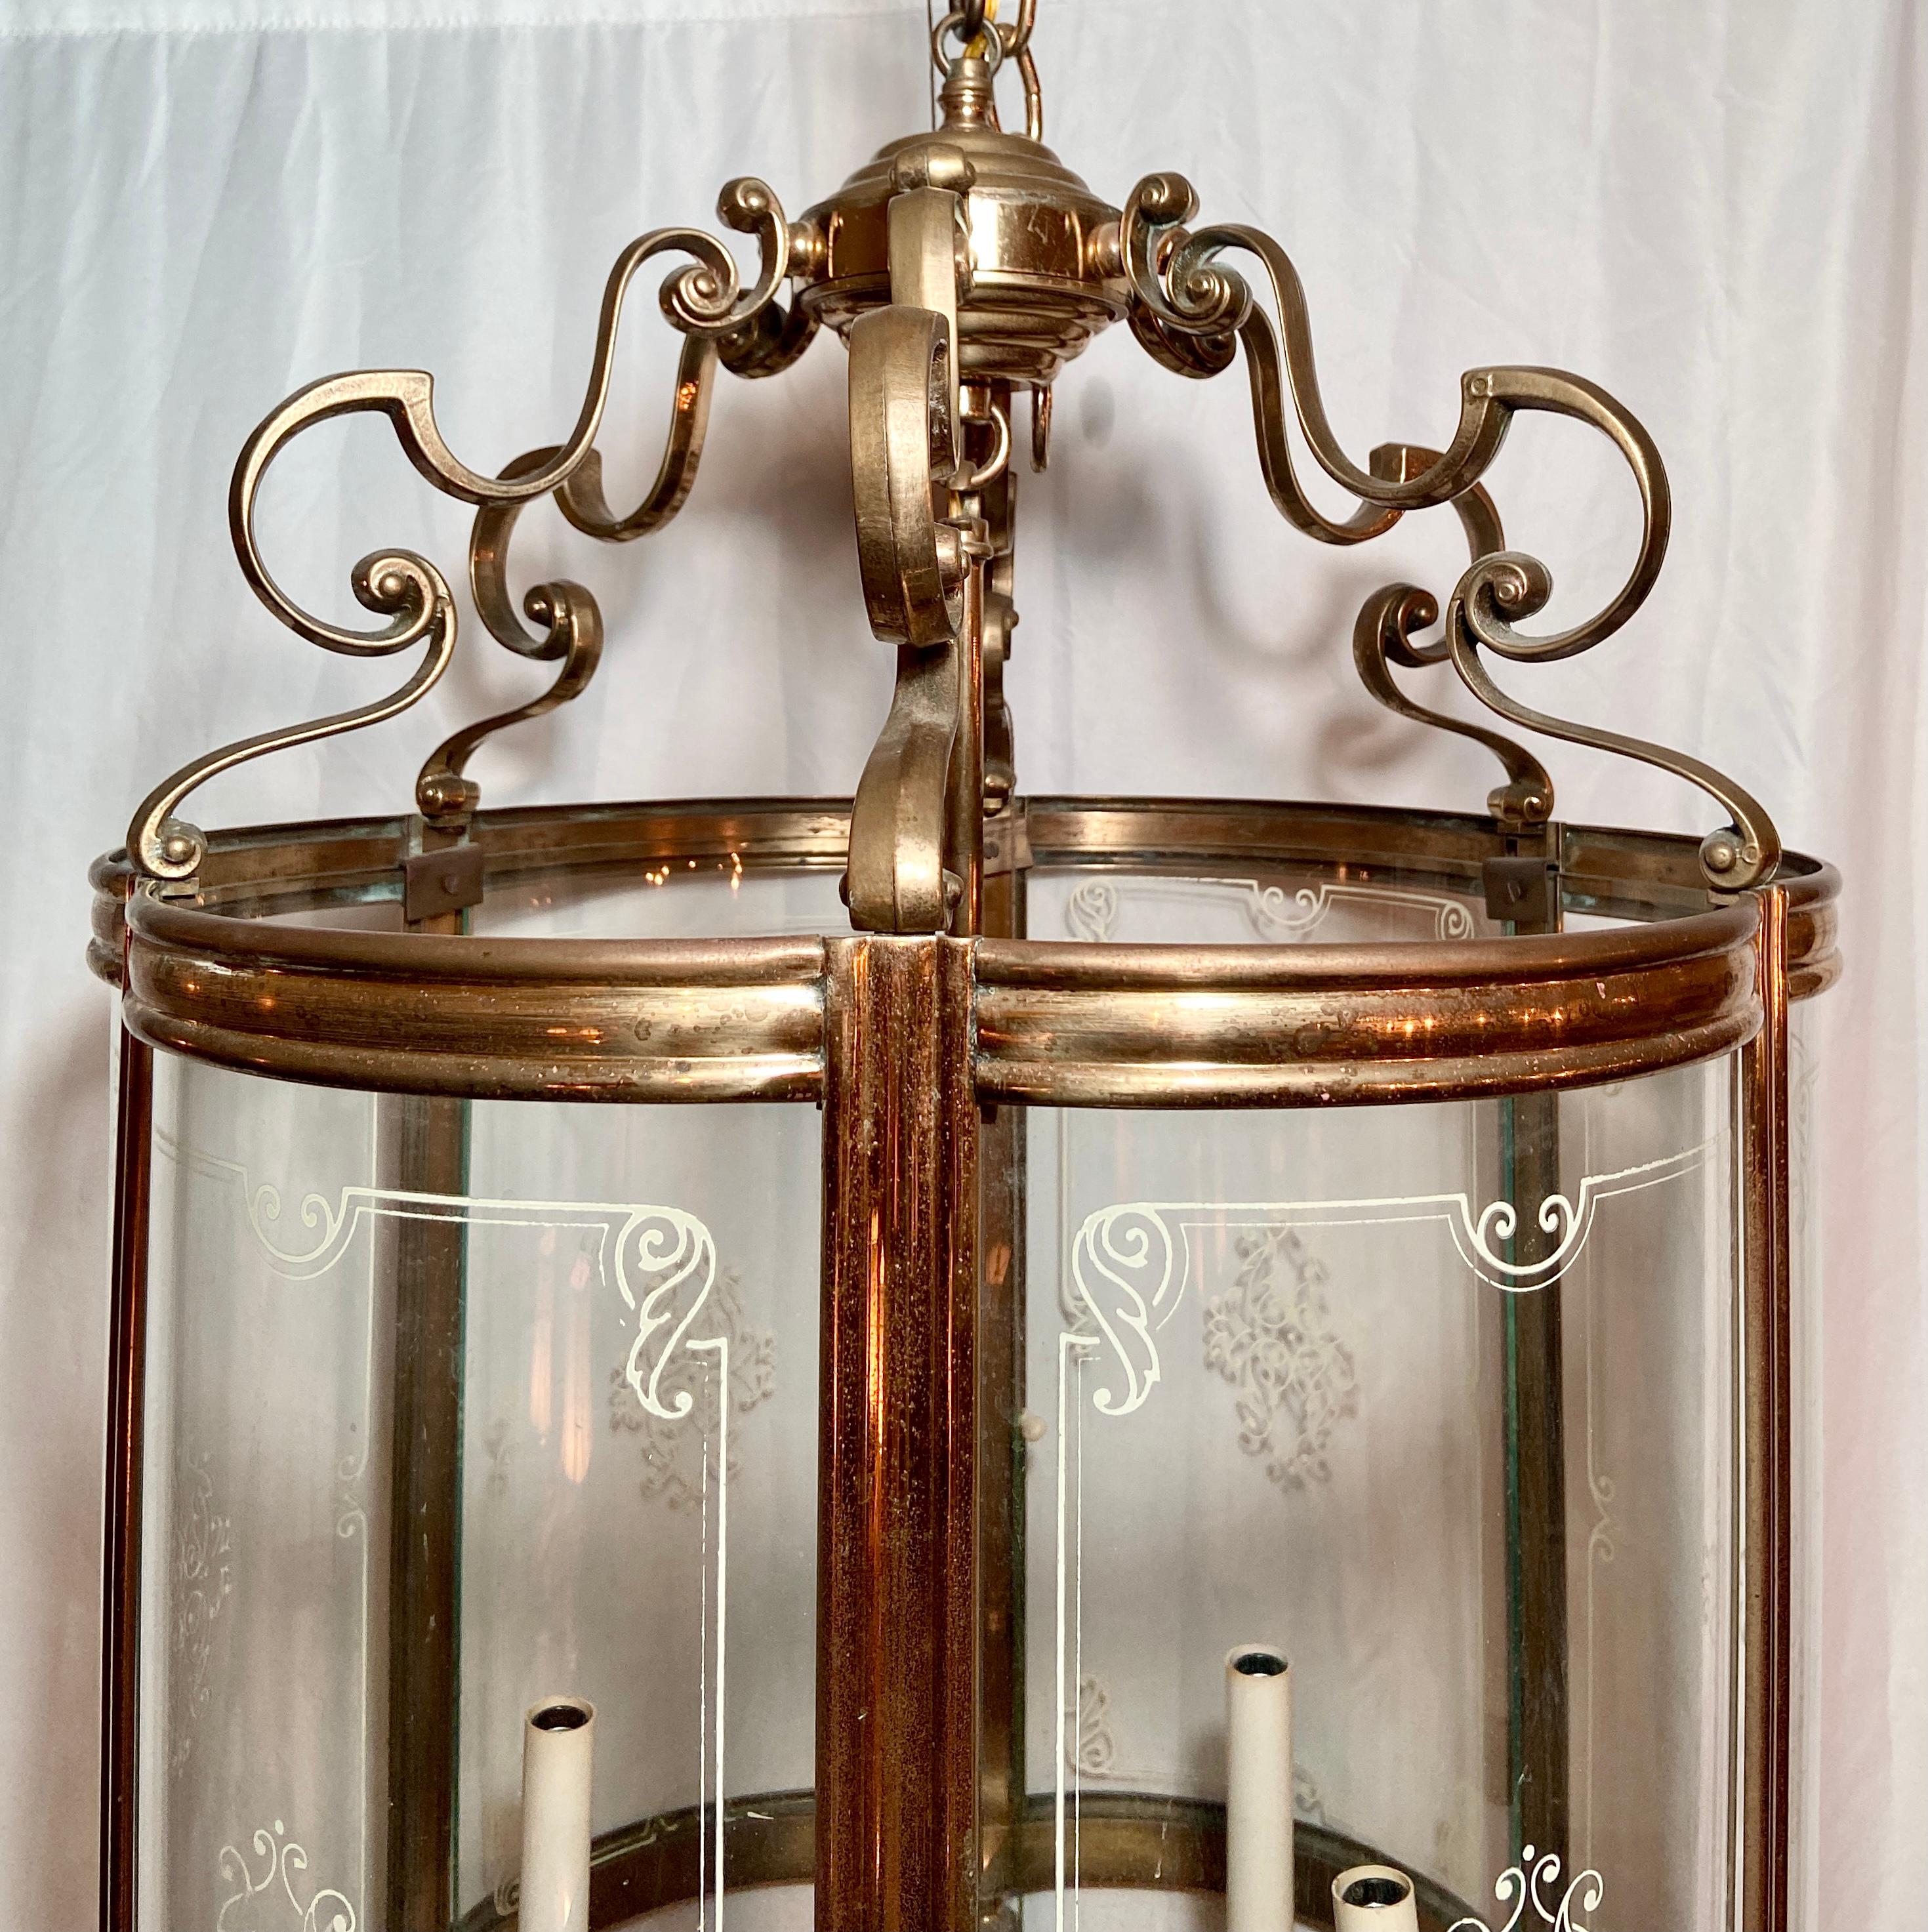 Antique 19th century European solid brass and curved glass lantern.